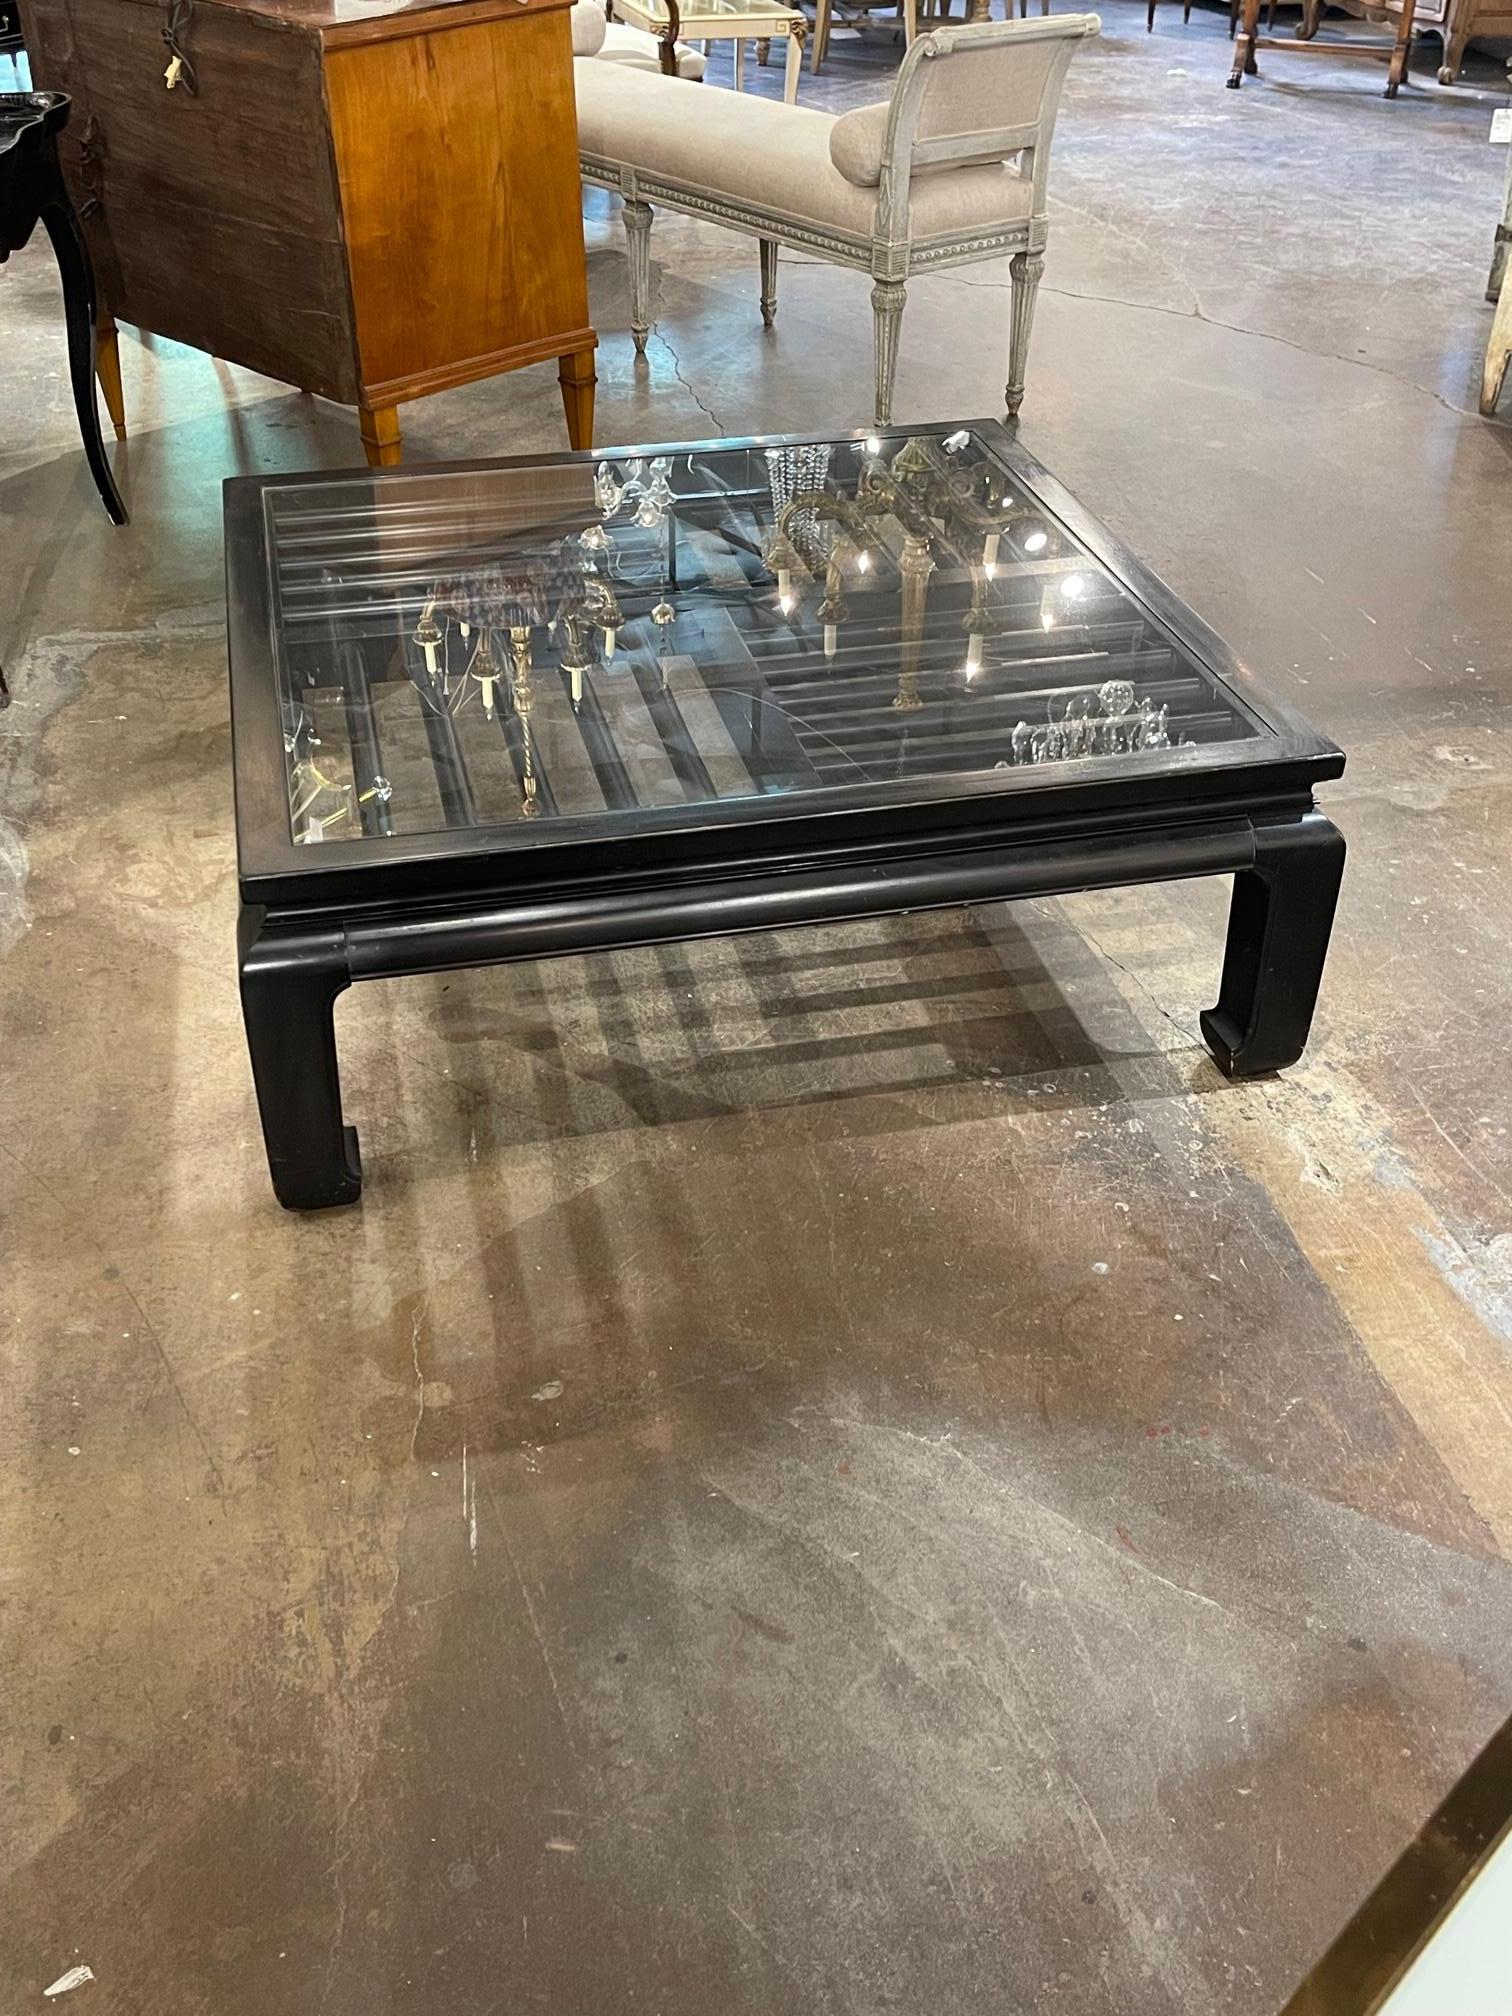 Handsome Mid-Century Modern square shaped ebonized coffee table with bar pattern and a glass top. Very fine quality and great for a variety of decors!